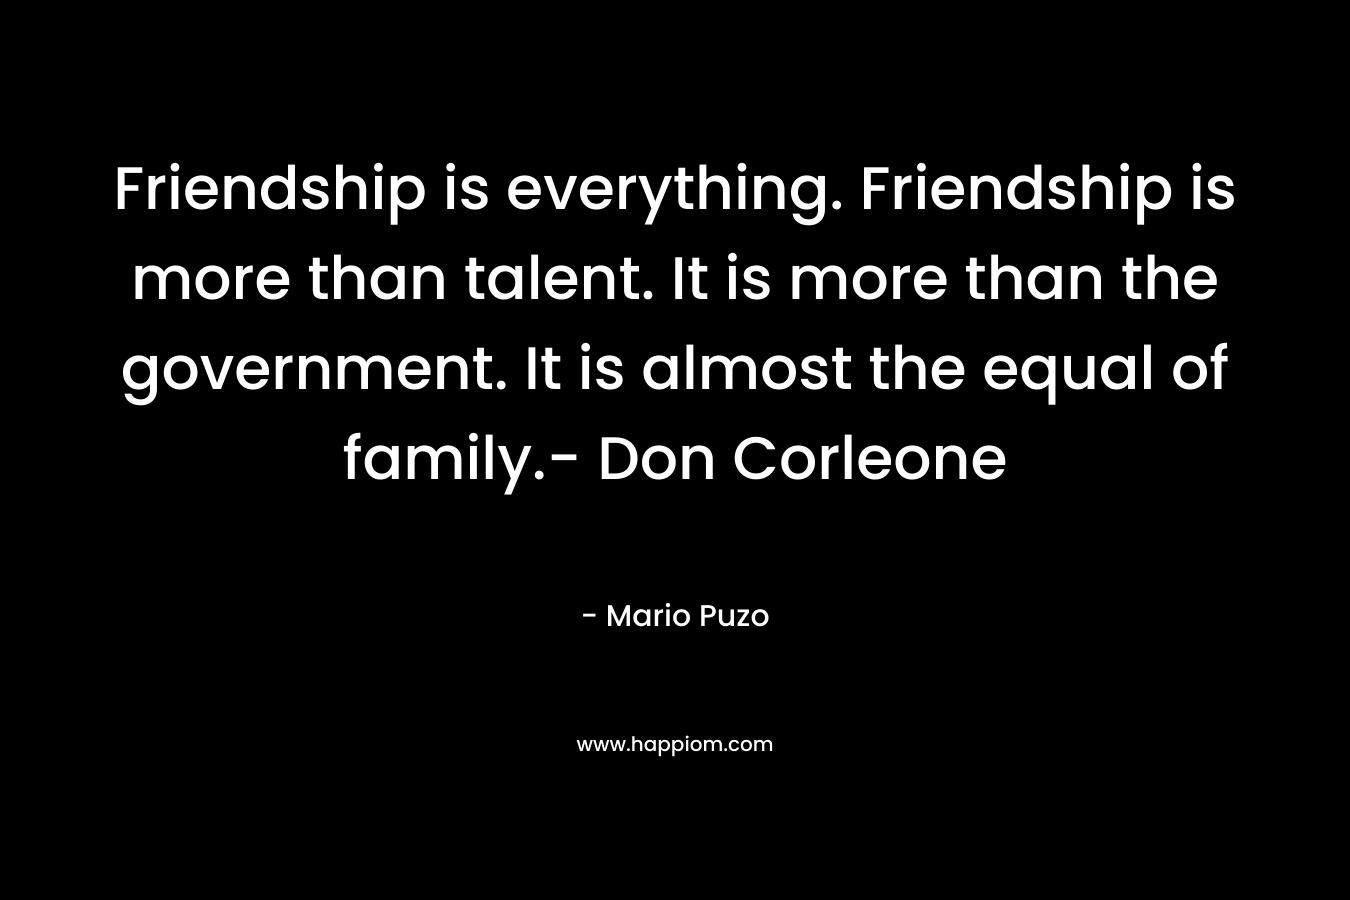 Friendship is everything. Friendship is more than talent. It is more than the government. It is almost the equal of family.- Don Corleone